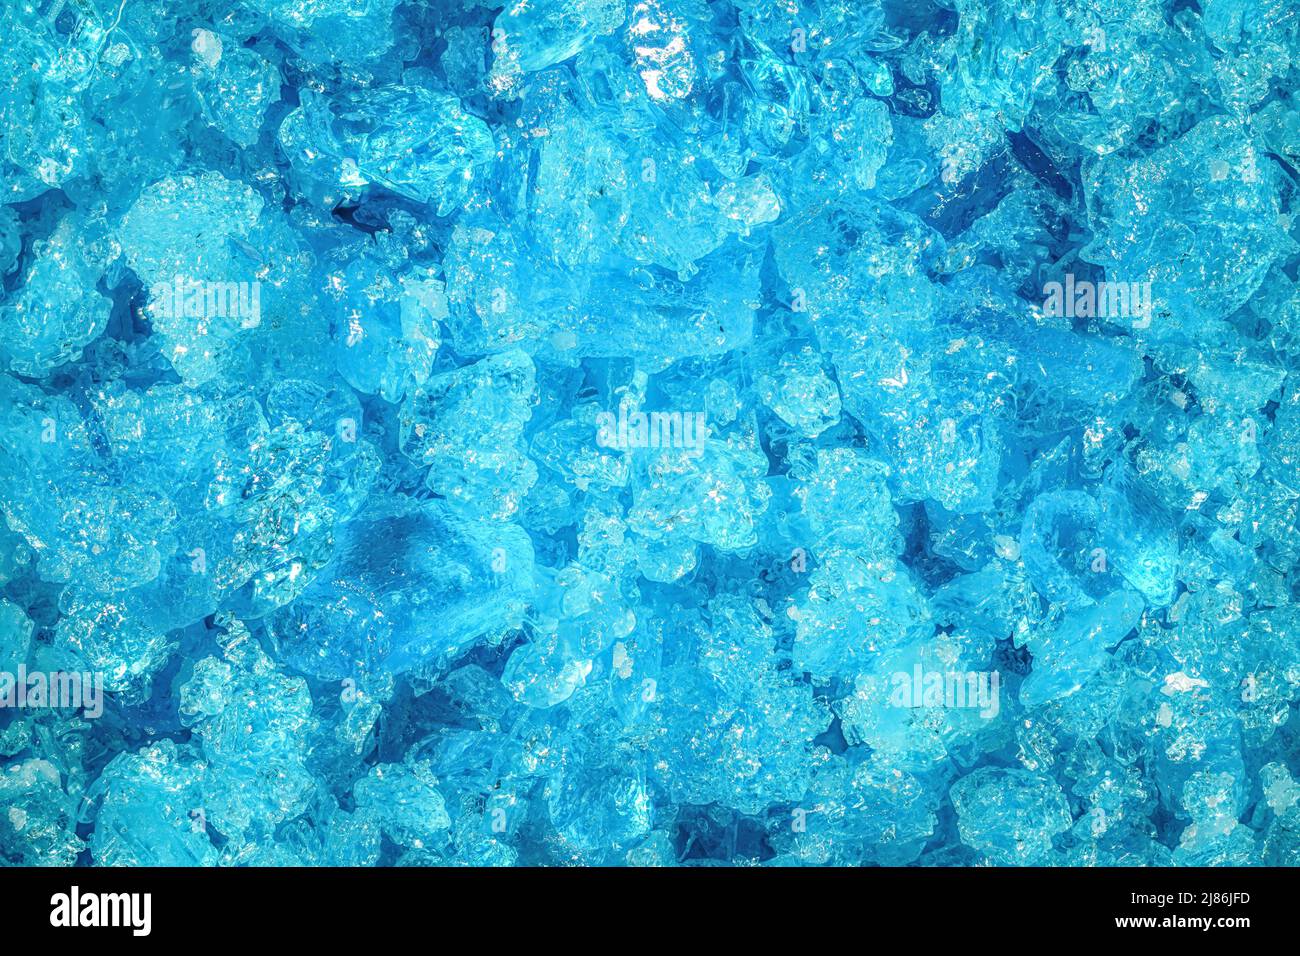 Blue copper sulphate crystals under 4x microscope magnification - image width = 8mm Stock Photo